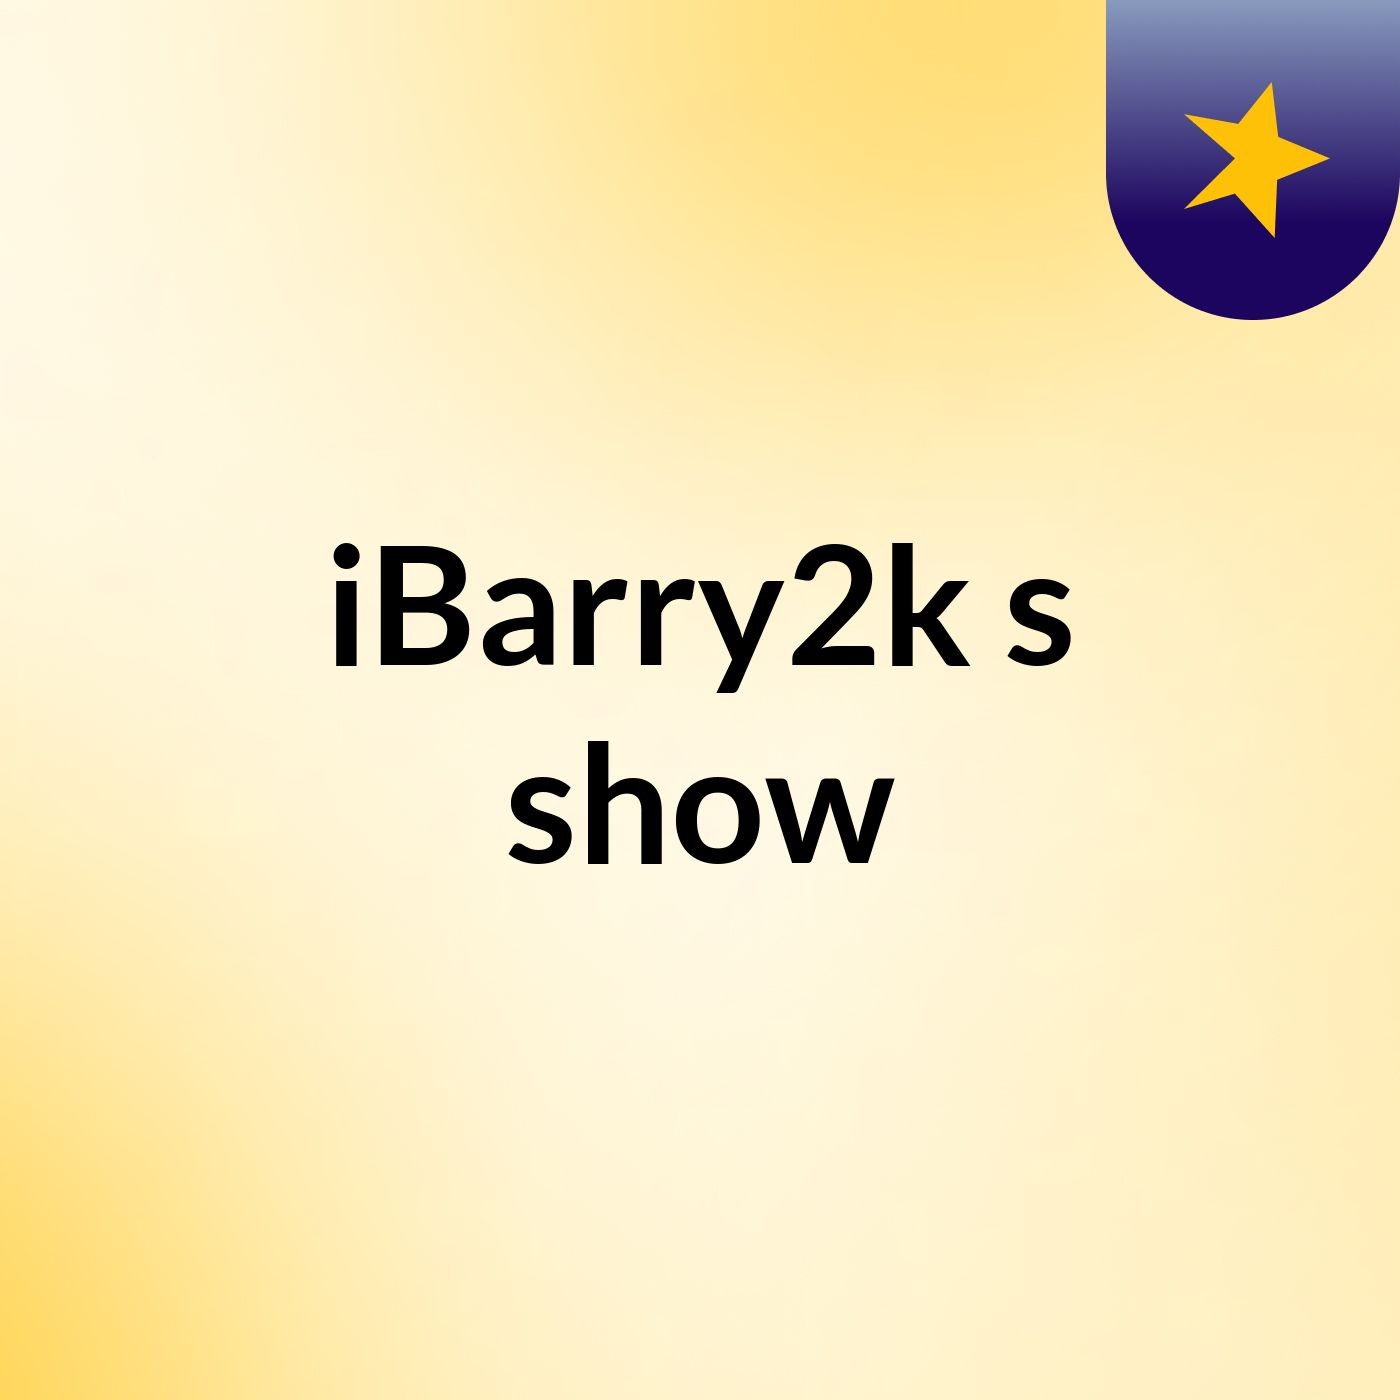 iBarry2k's show